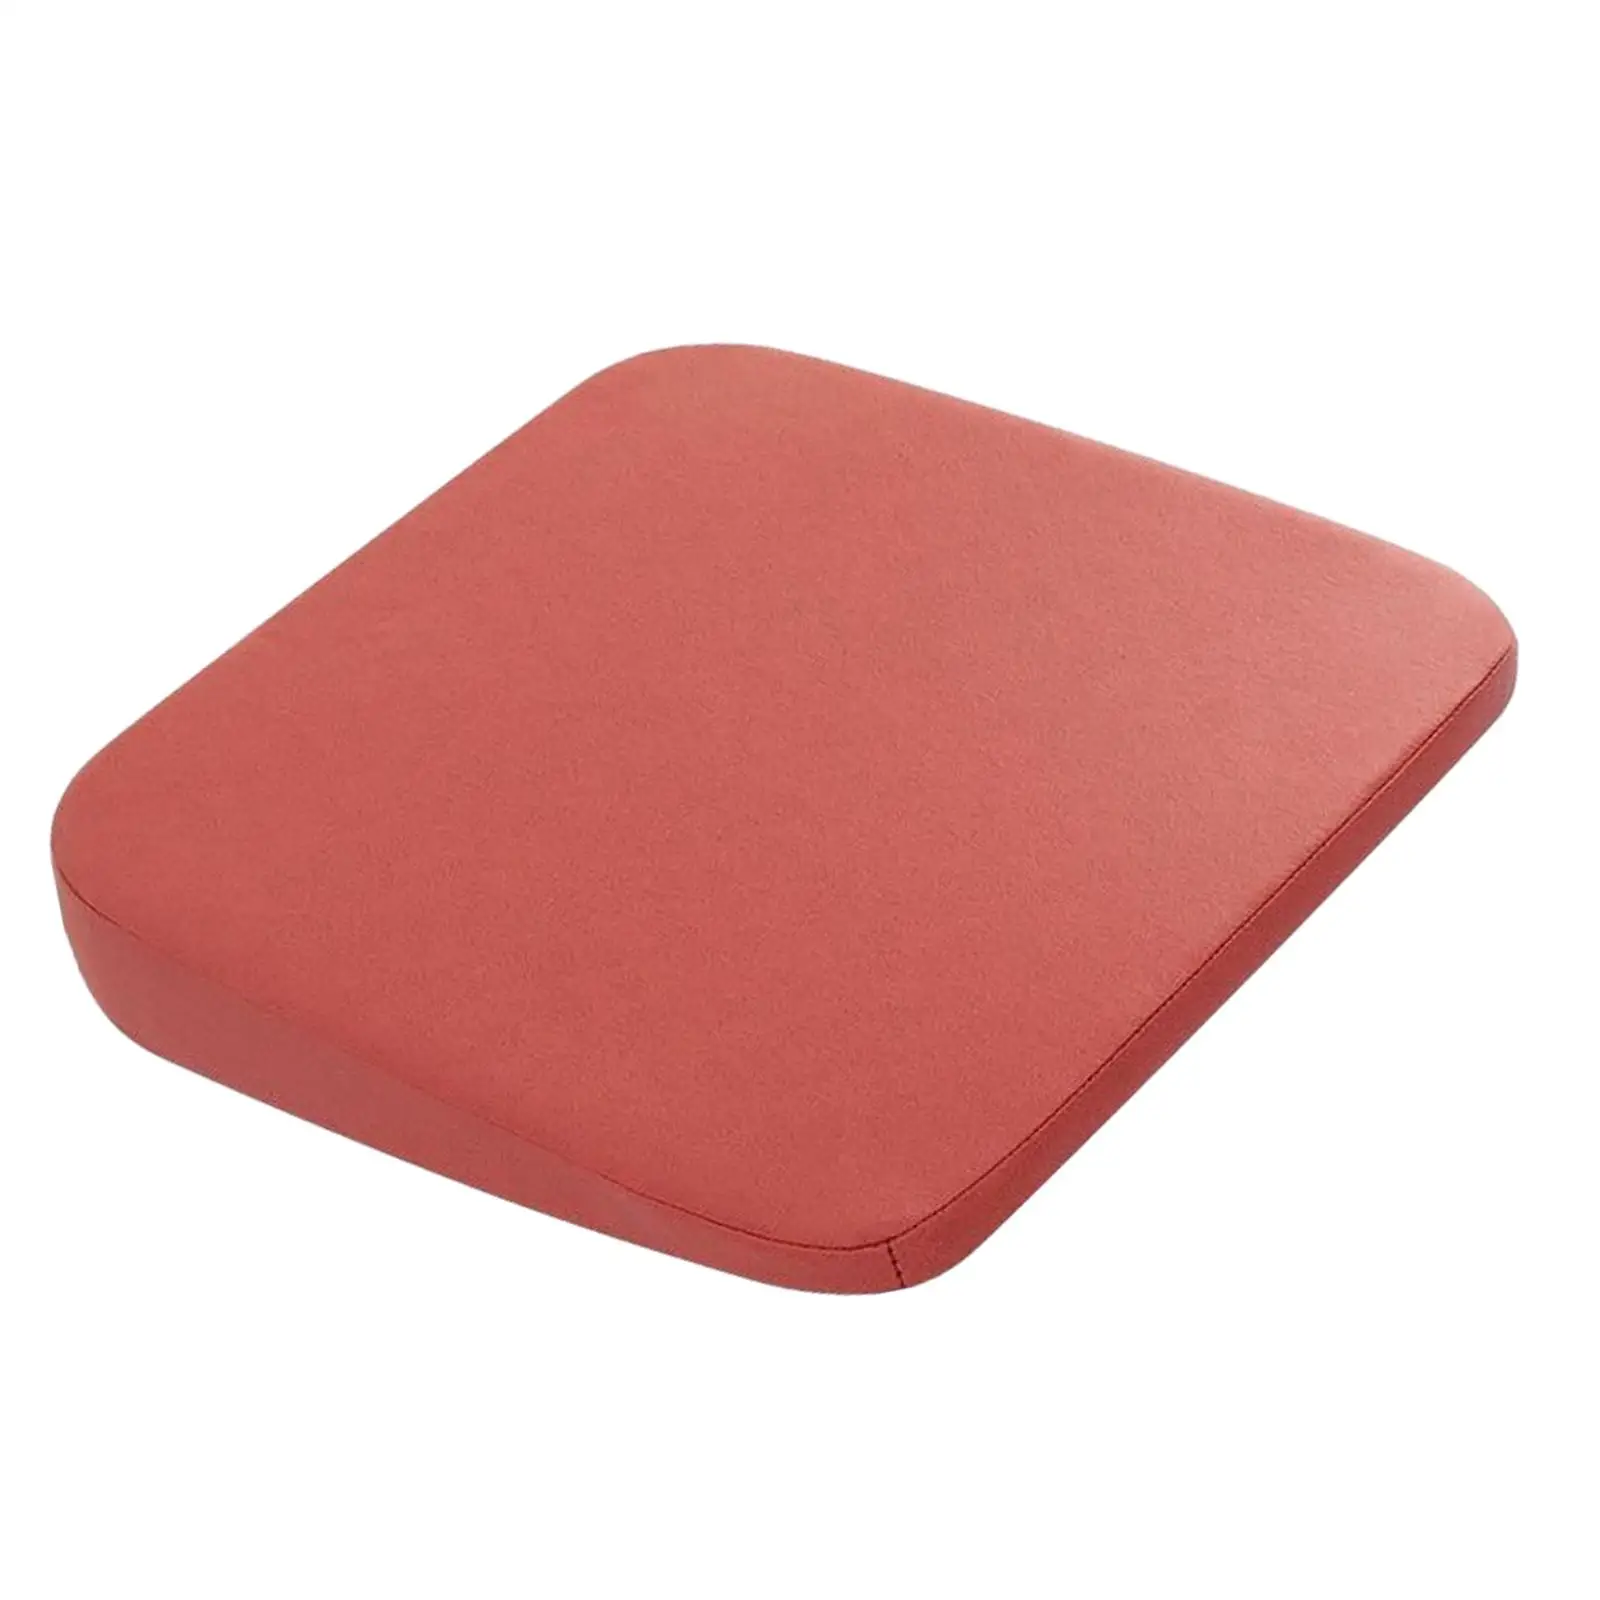 Adult Booster Seat for Car Bevel Auto Seat Pad Breathable Protector Anti Slip Comfortable Seat Mat Office/Home Chair Seat